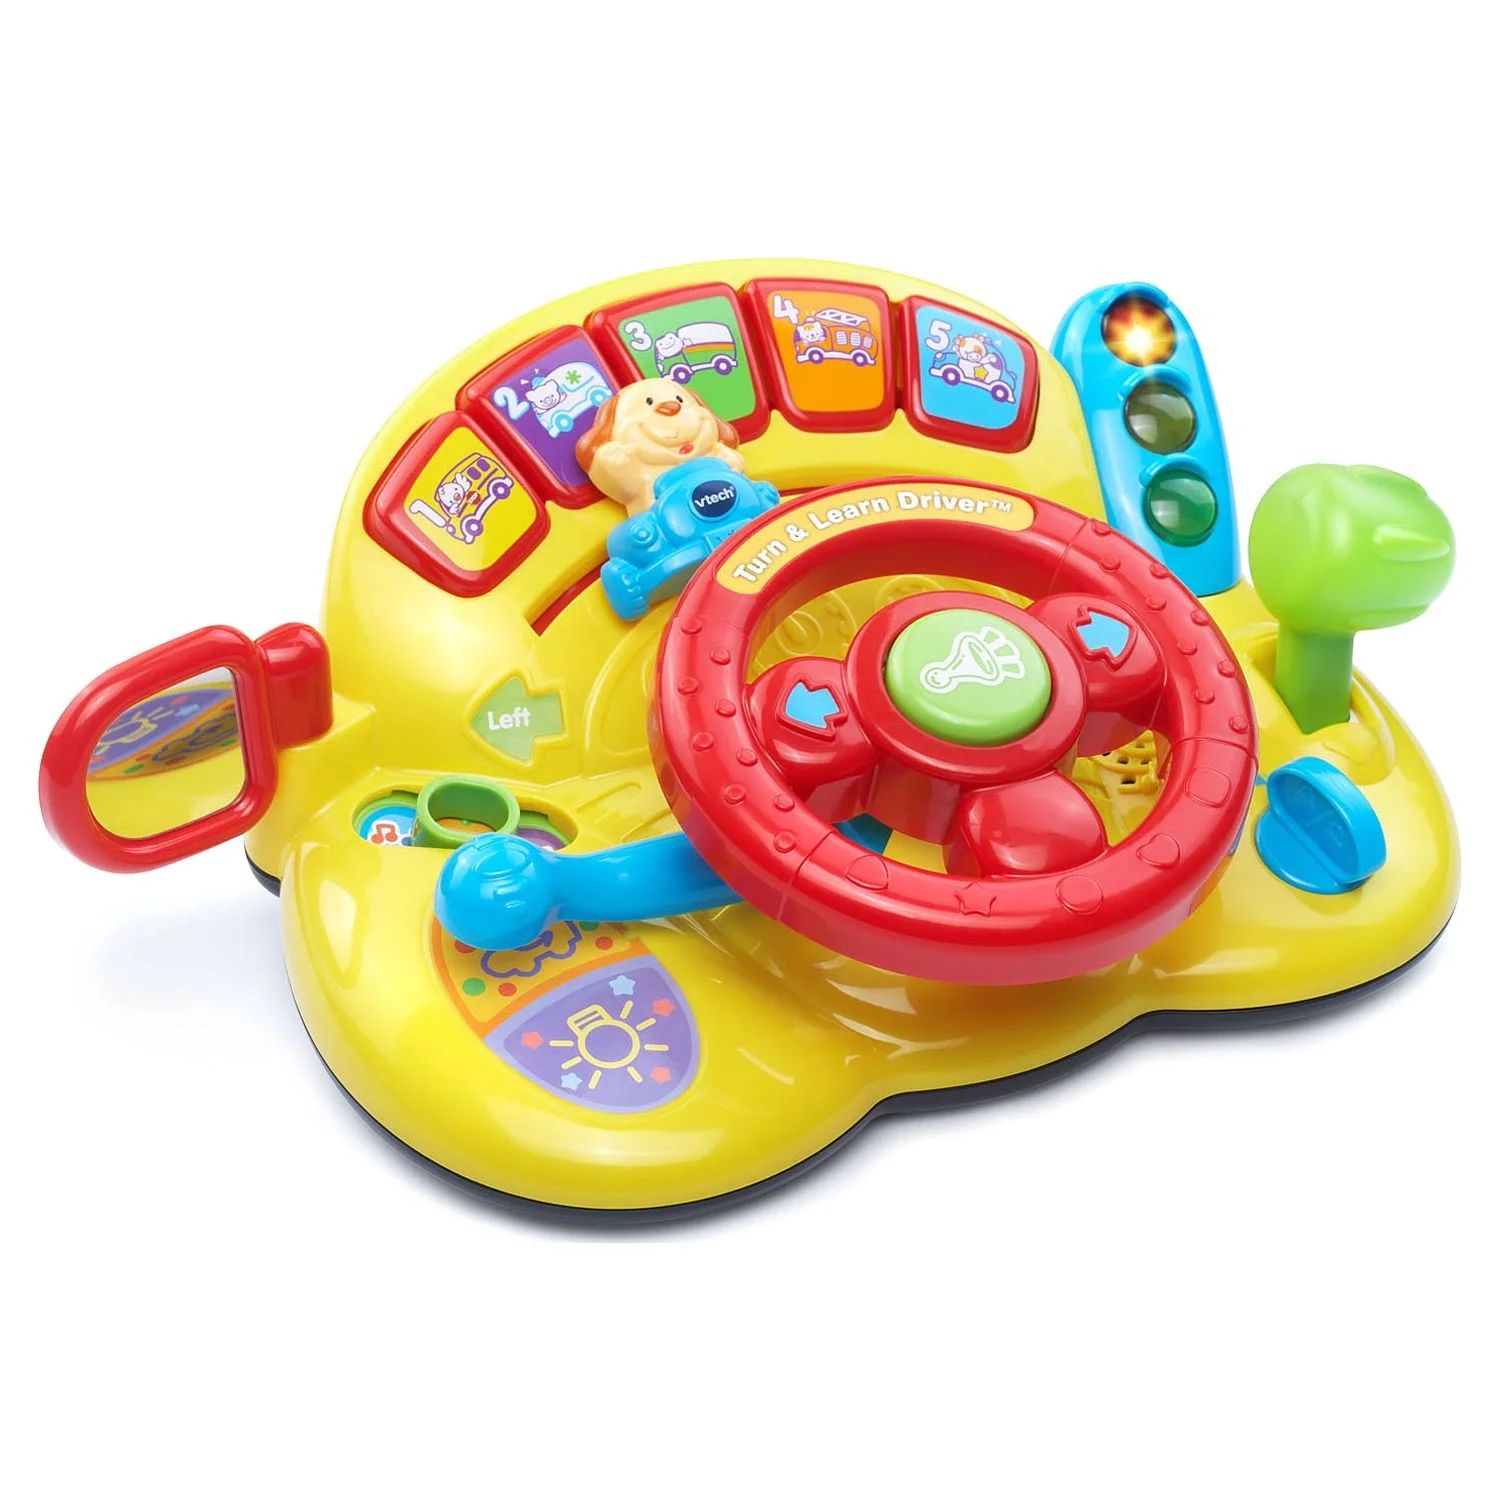 VTech Turn and Learn Driver, Role-Play Toy for Baby, Teaches Animals, Colors | Walmart (US)